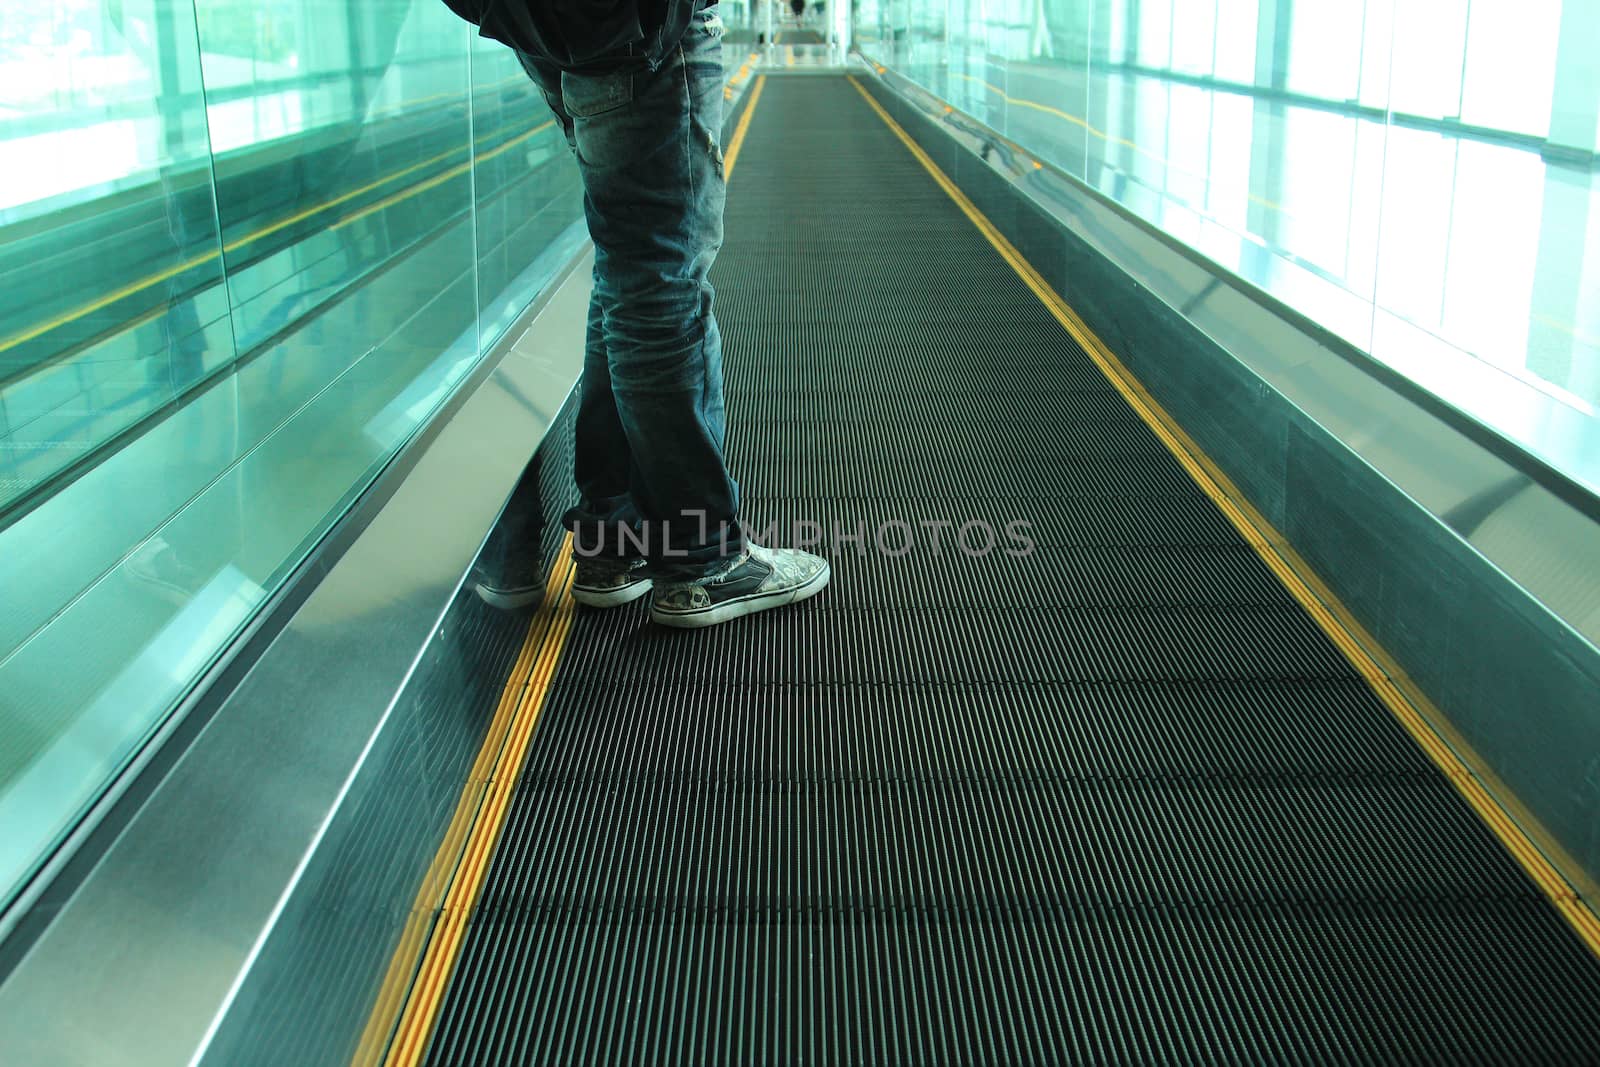 Movement of escalator with people